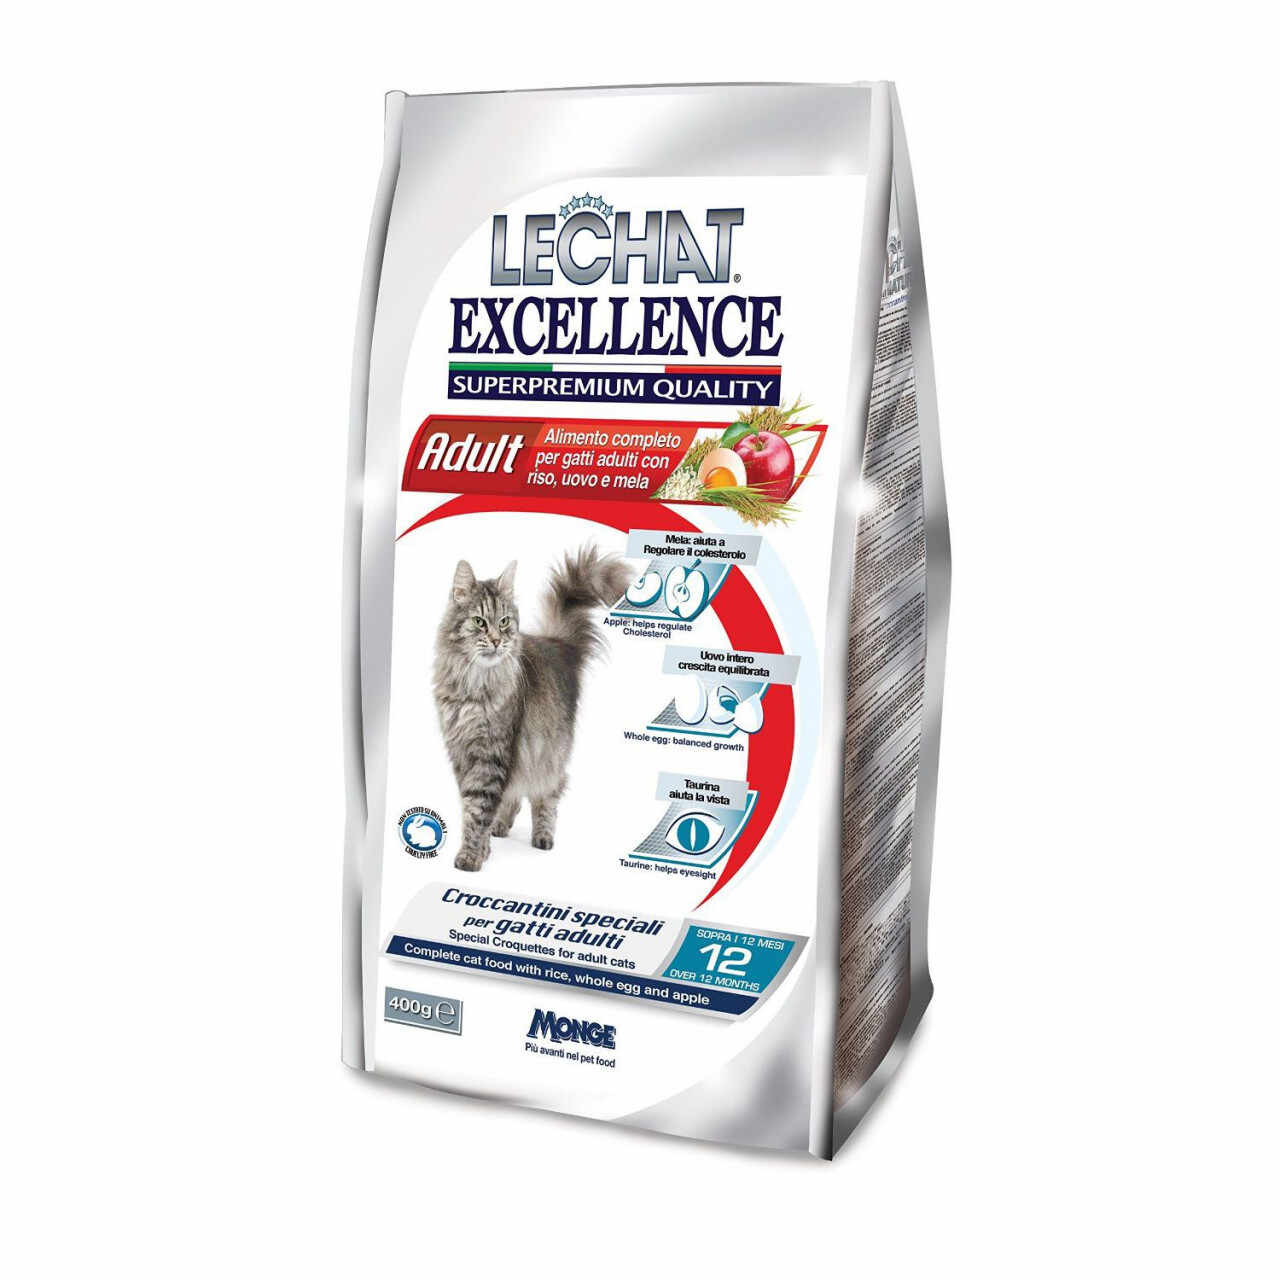 Lechat Excelence Adult, Pui, 400g